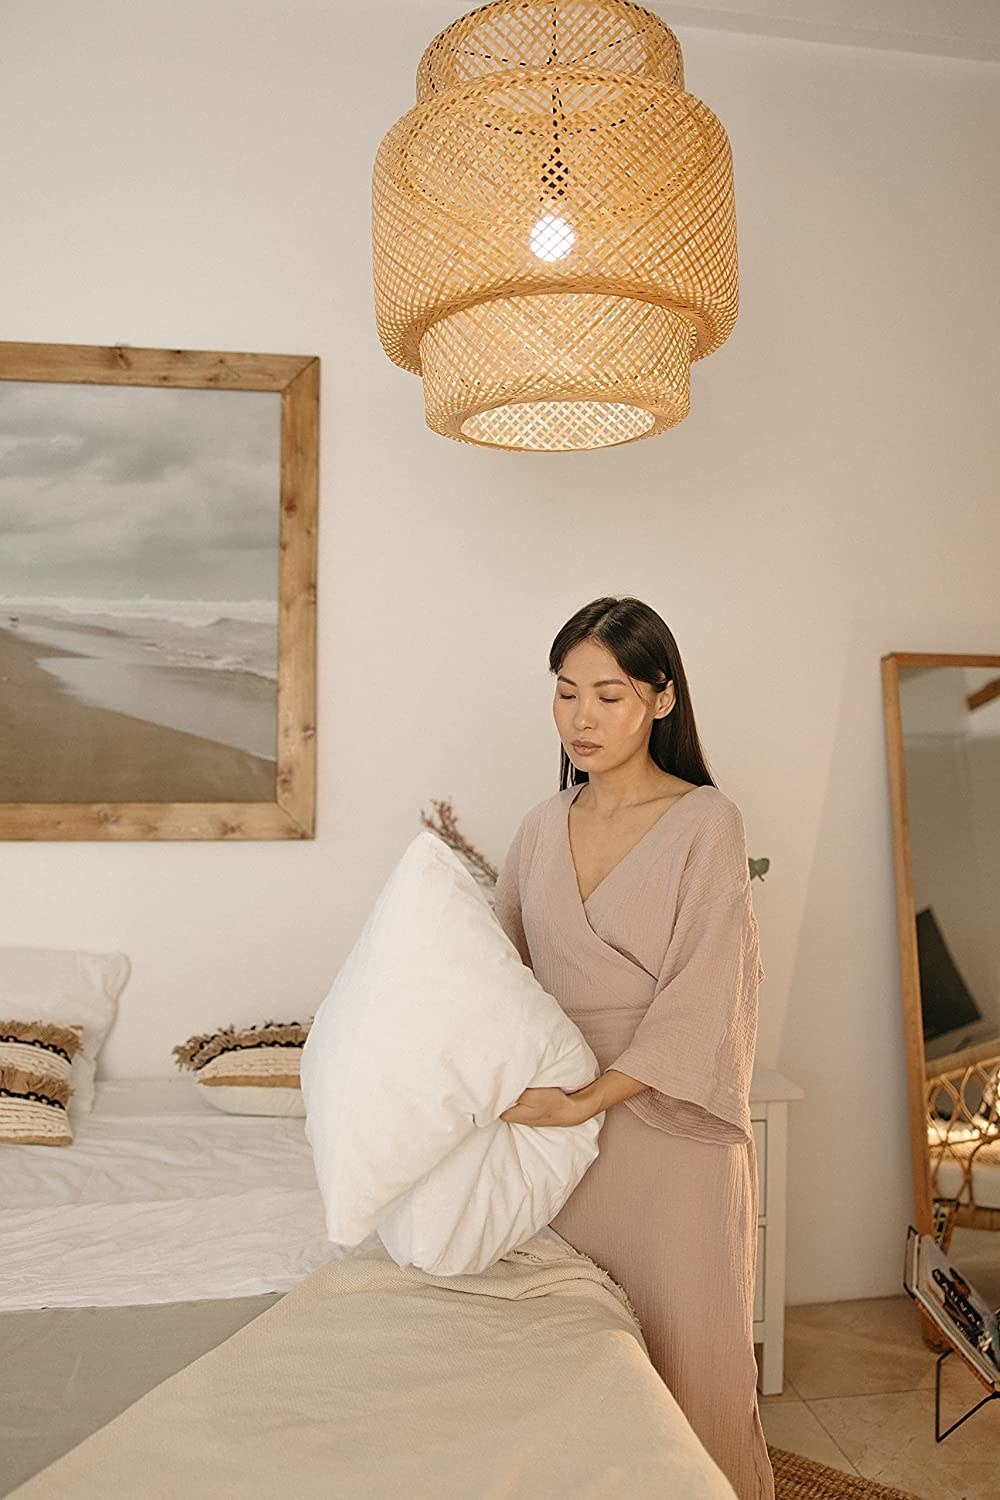 three tiered woven pendant light cover made with rattan. the image shows a model making their bed underneath the light.